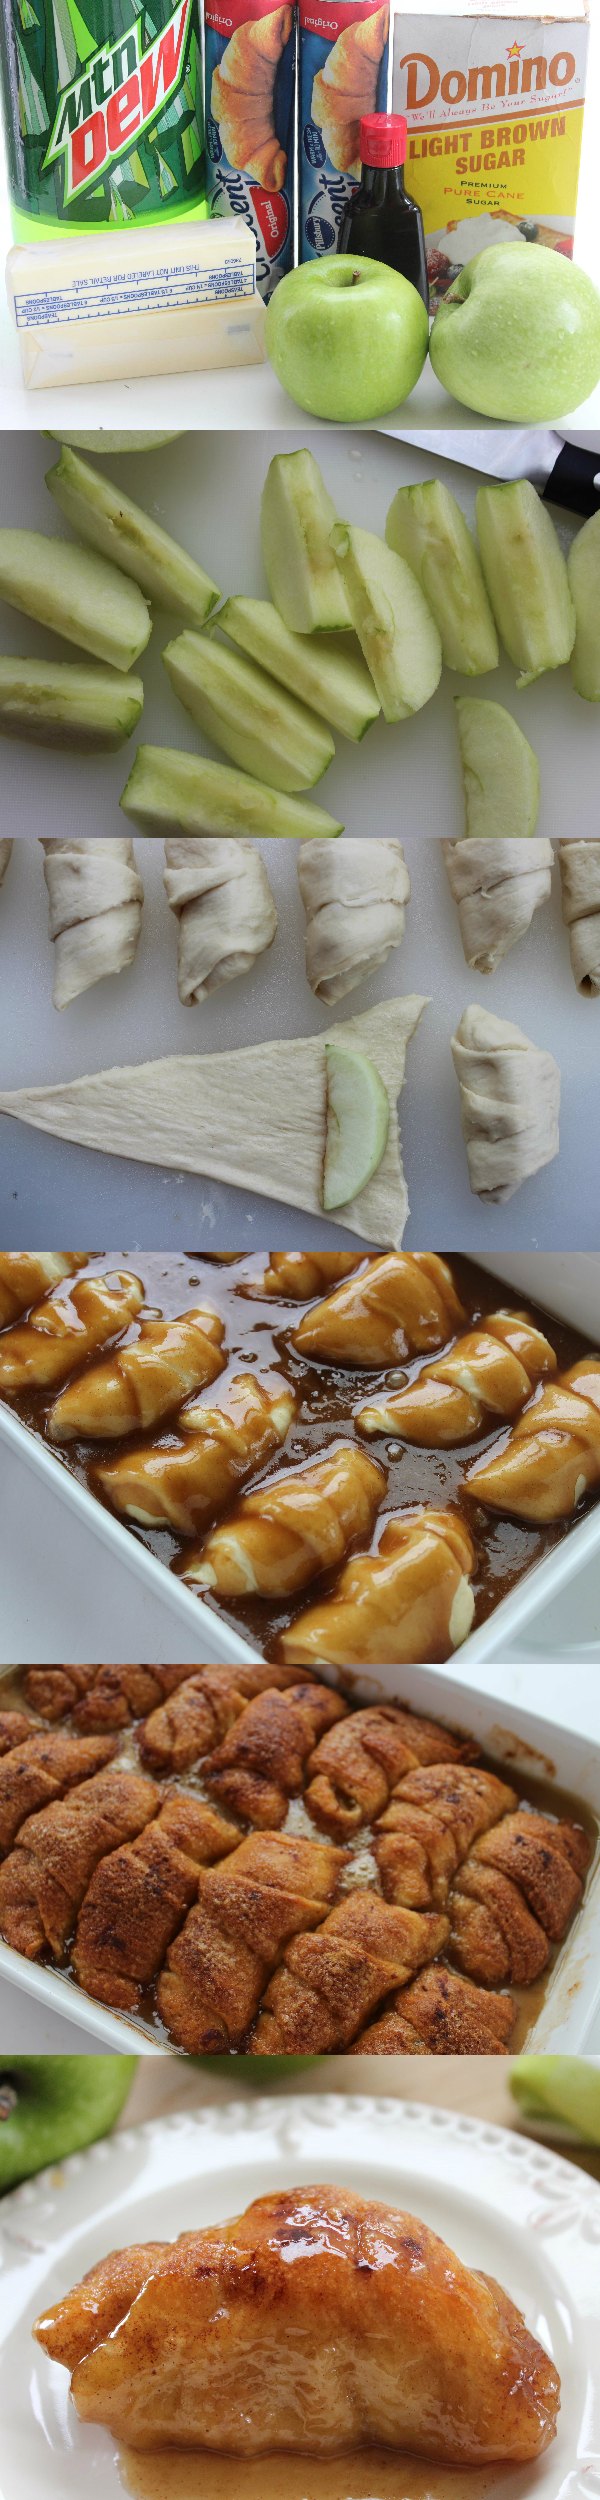 You won't believe how easy this dumpling recipe is to make! With fresh, juicy apples and crescent rolls this dessert is super easy to make with incredible flavor and texture.